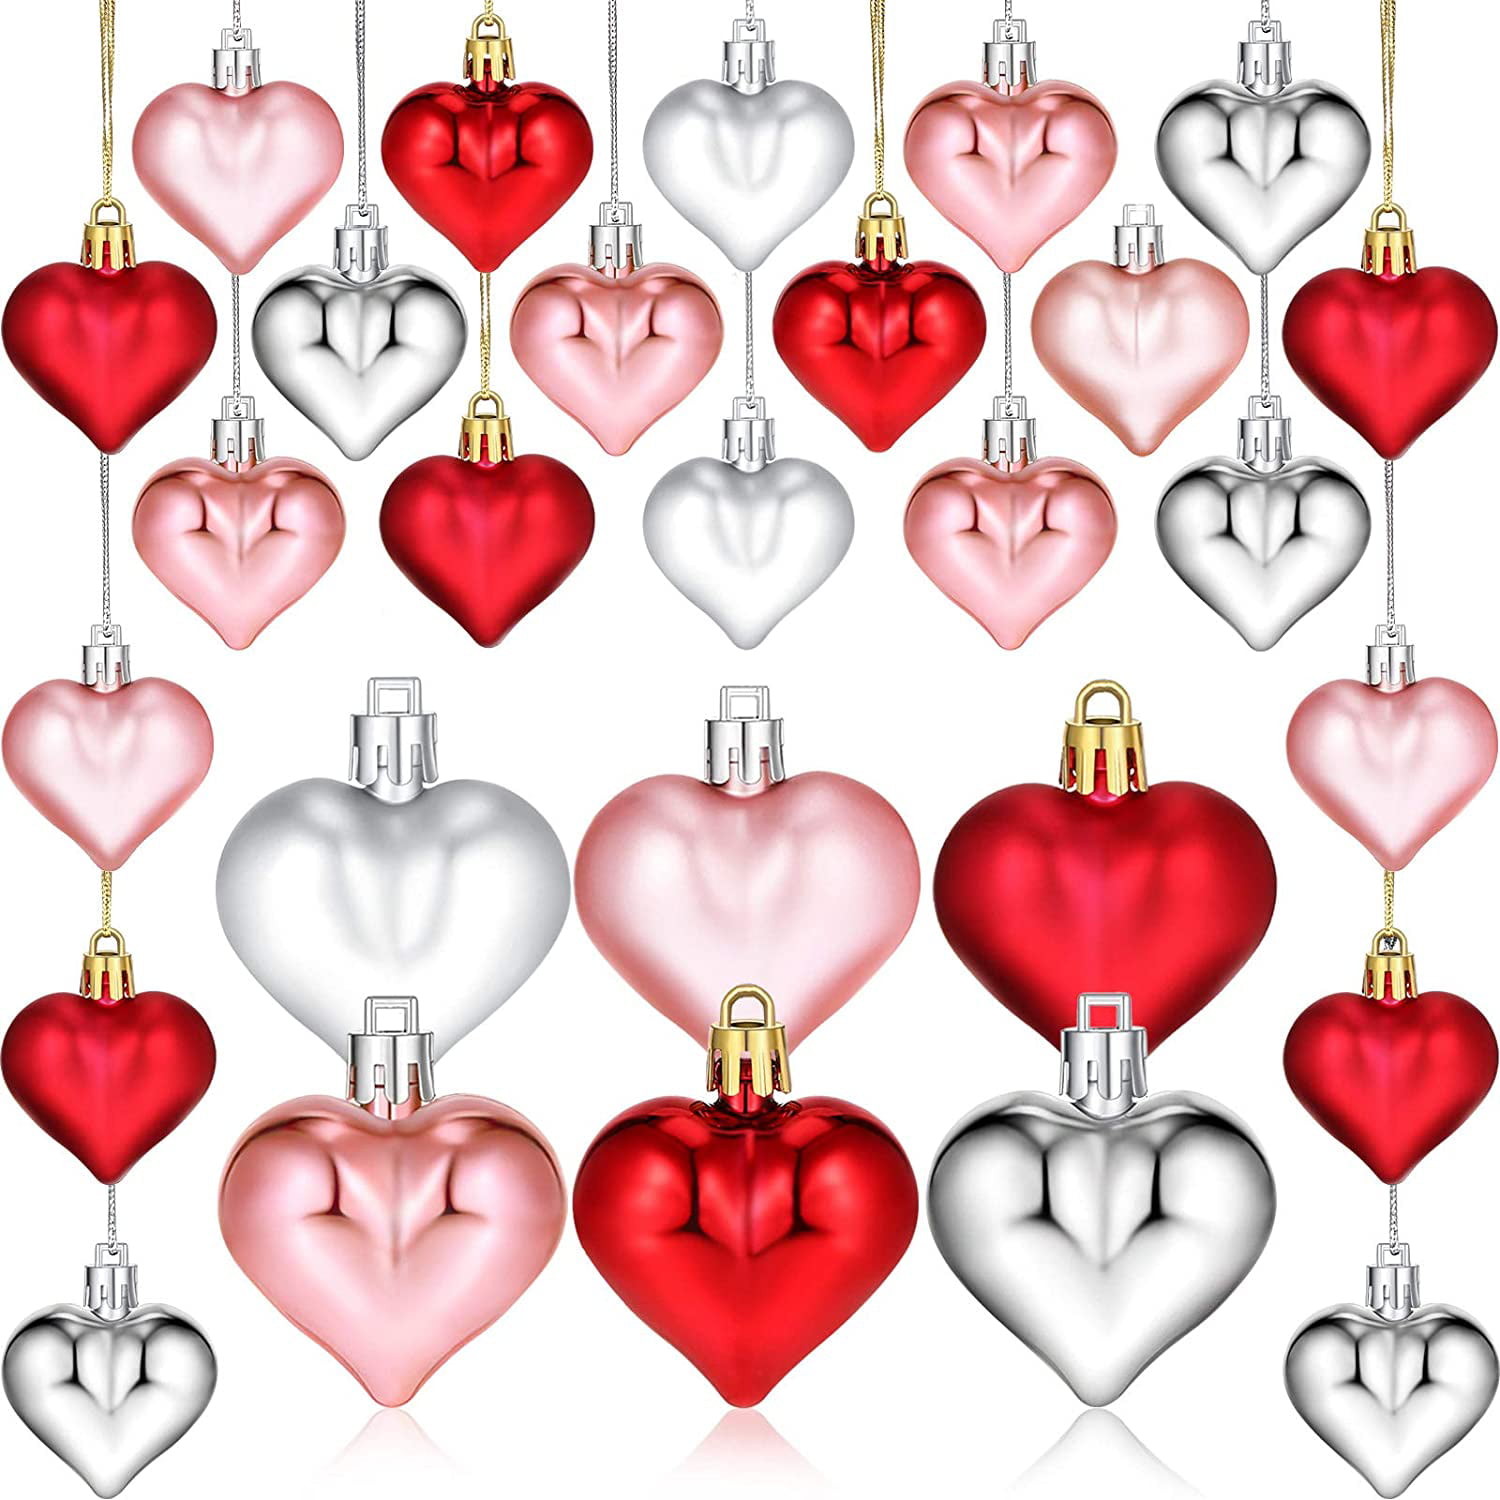 Sliver 36 Pieces Valentine's Day Heart Baubles 3D Colorful Heart Shaped Baubles Heart Tree Mini Glitter Heart Hanging Ornaments for Valentine Wedding Anniversary Decoration Red Rose Gold 